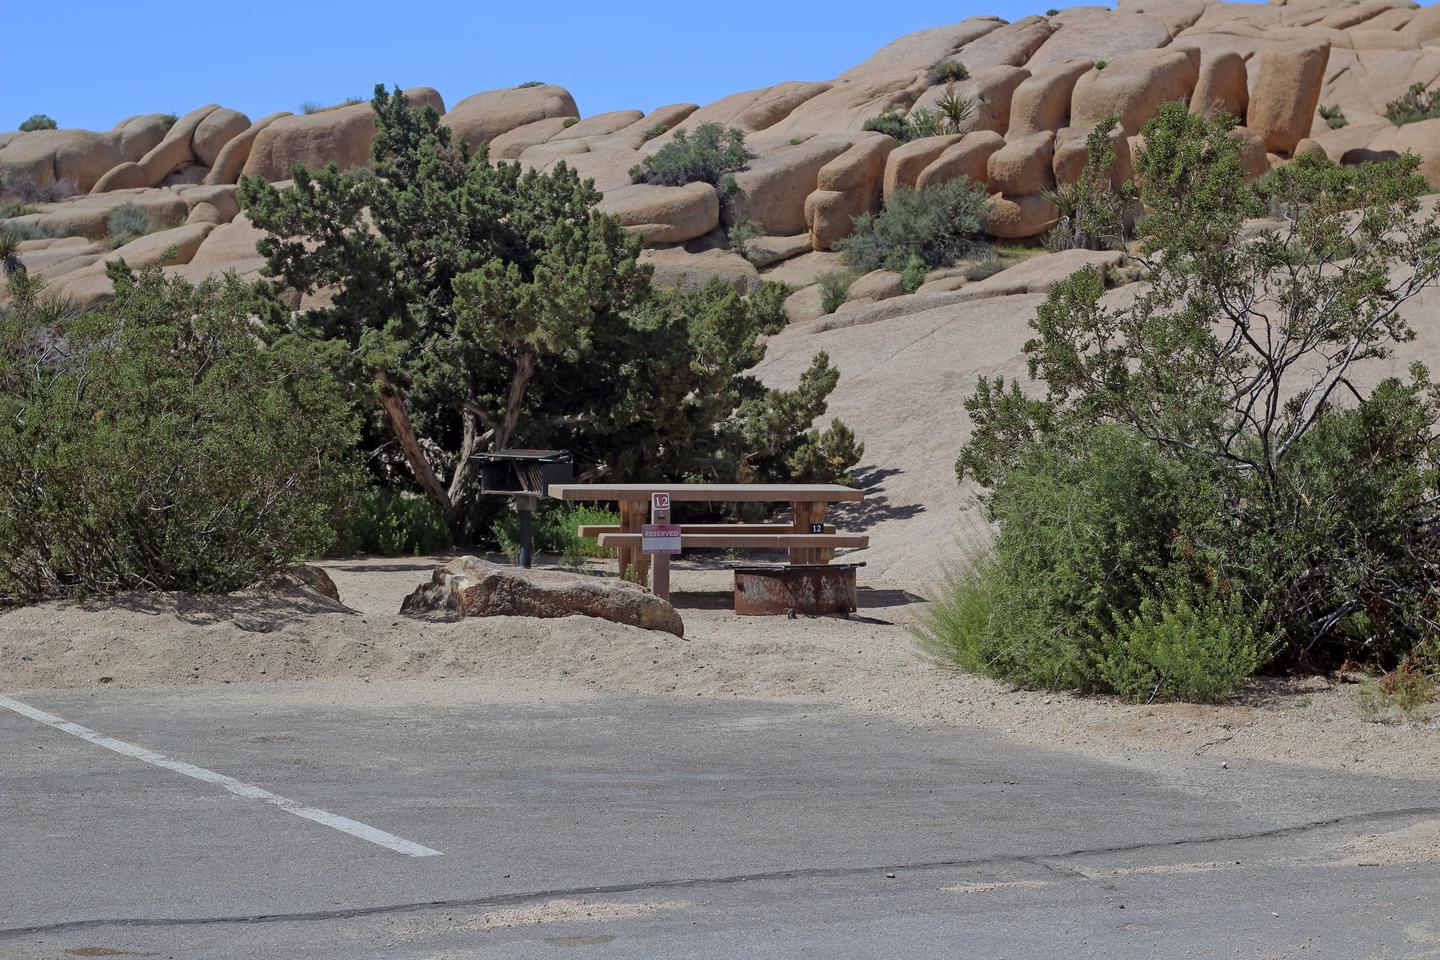  Shared parking for campsite. Picnic table surrounded by boulders and green plants.Shared parking for campsite.